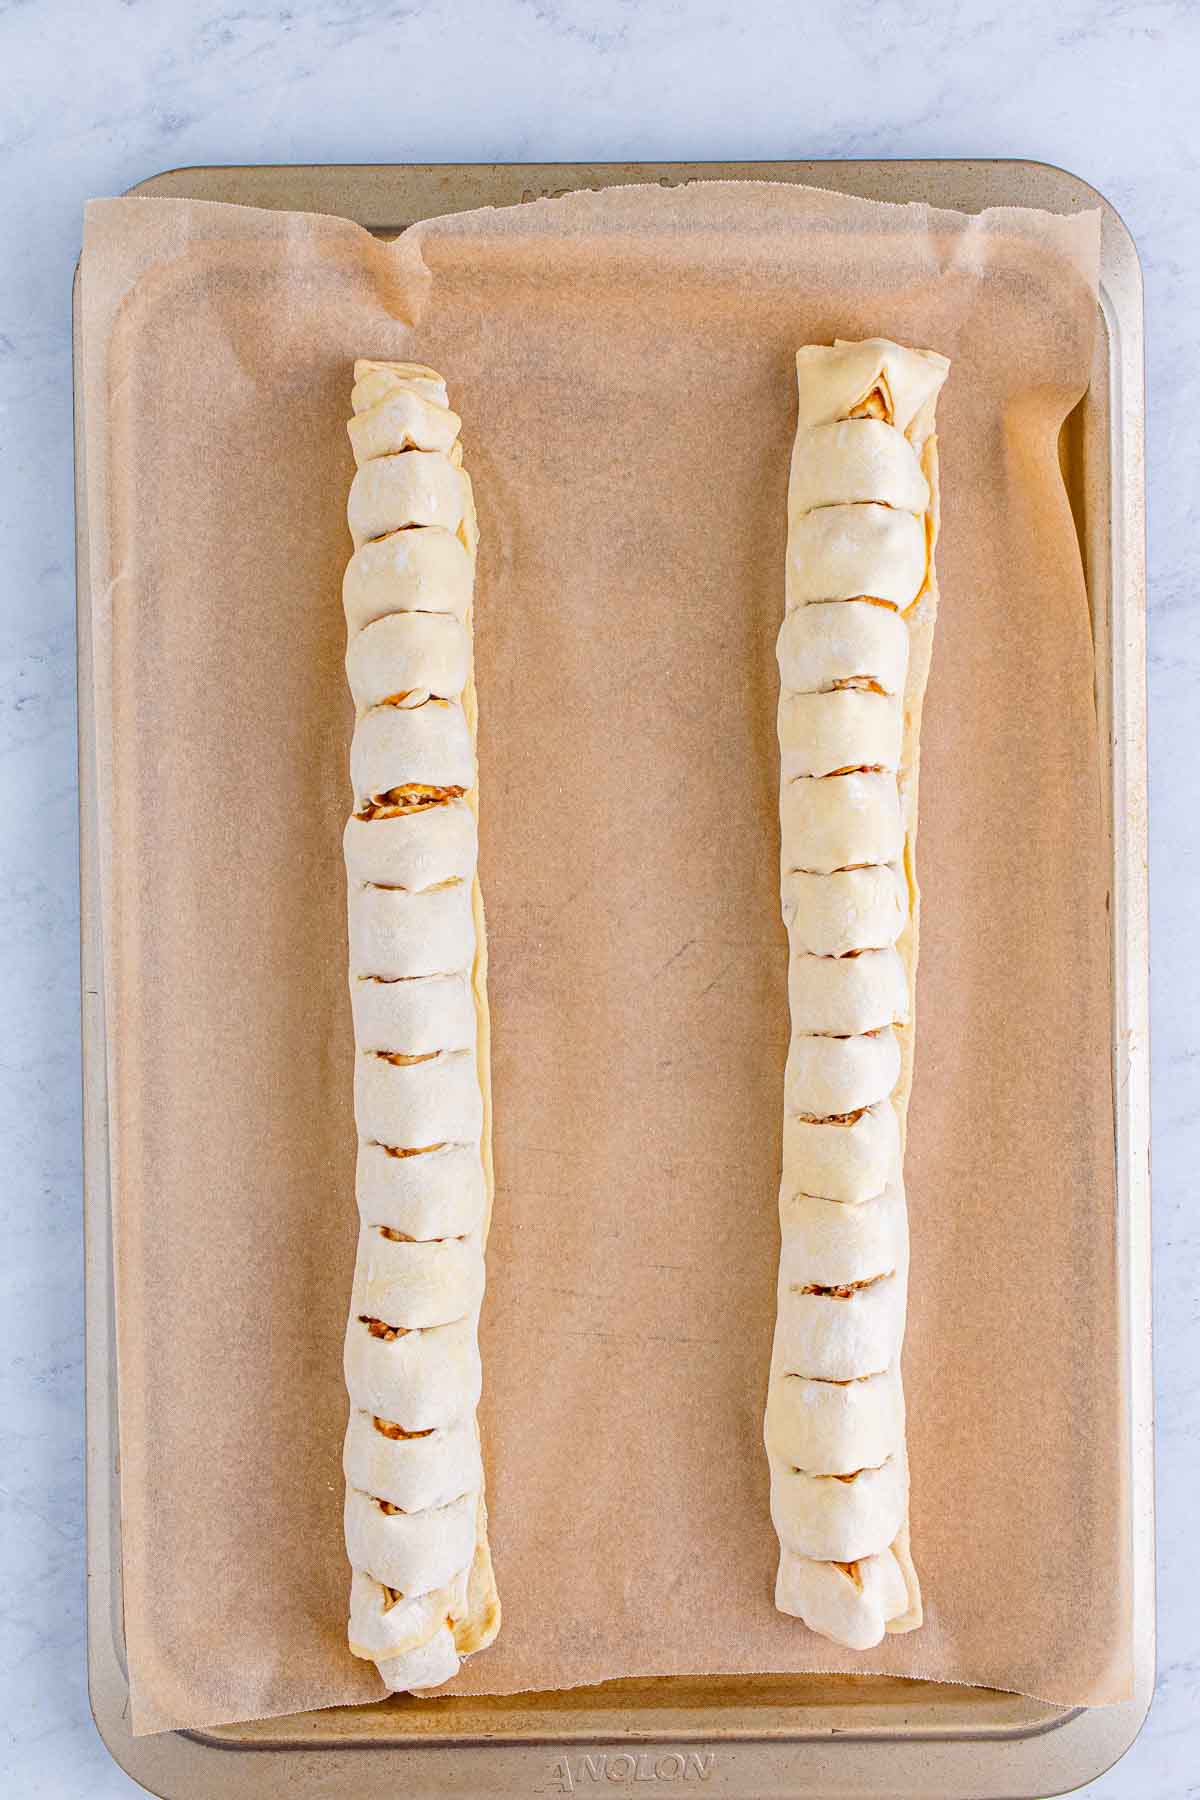 puff pastry cut with slits